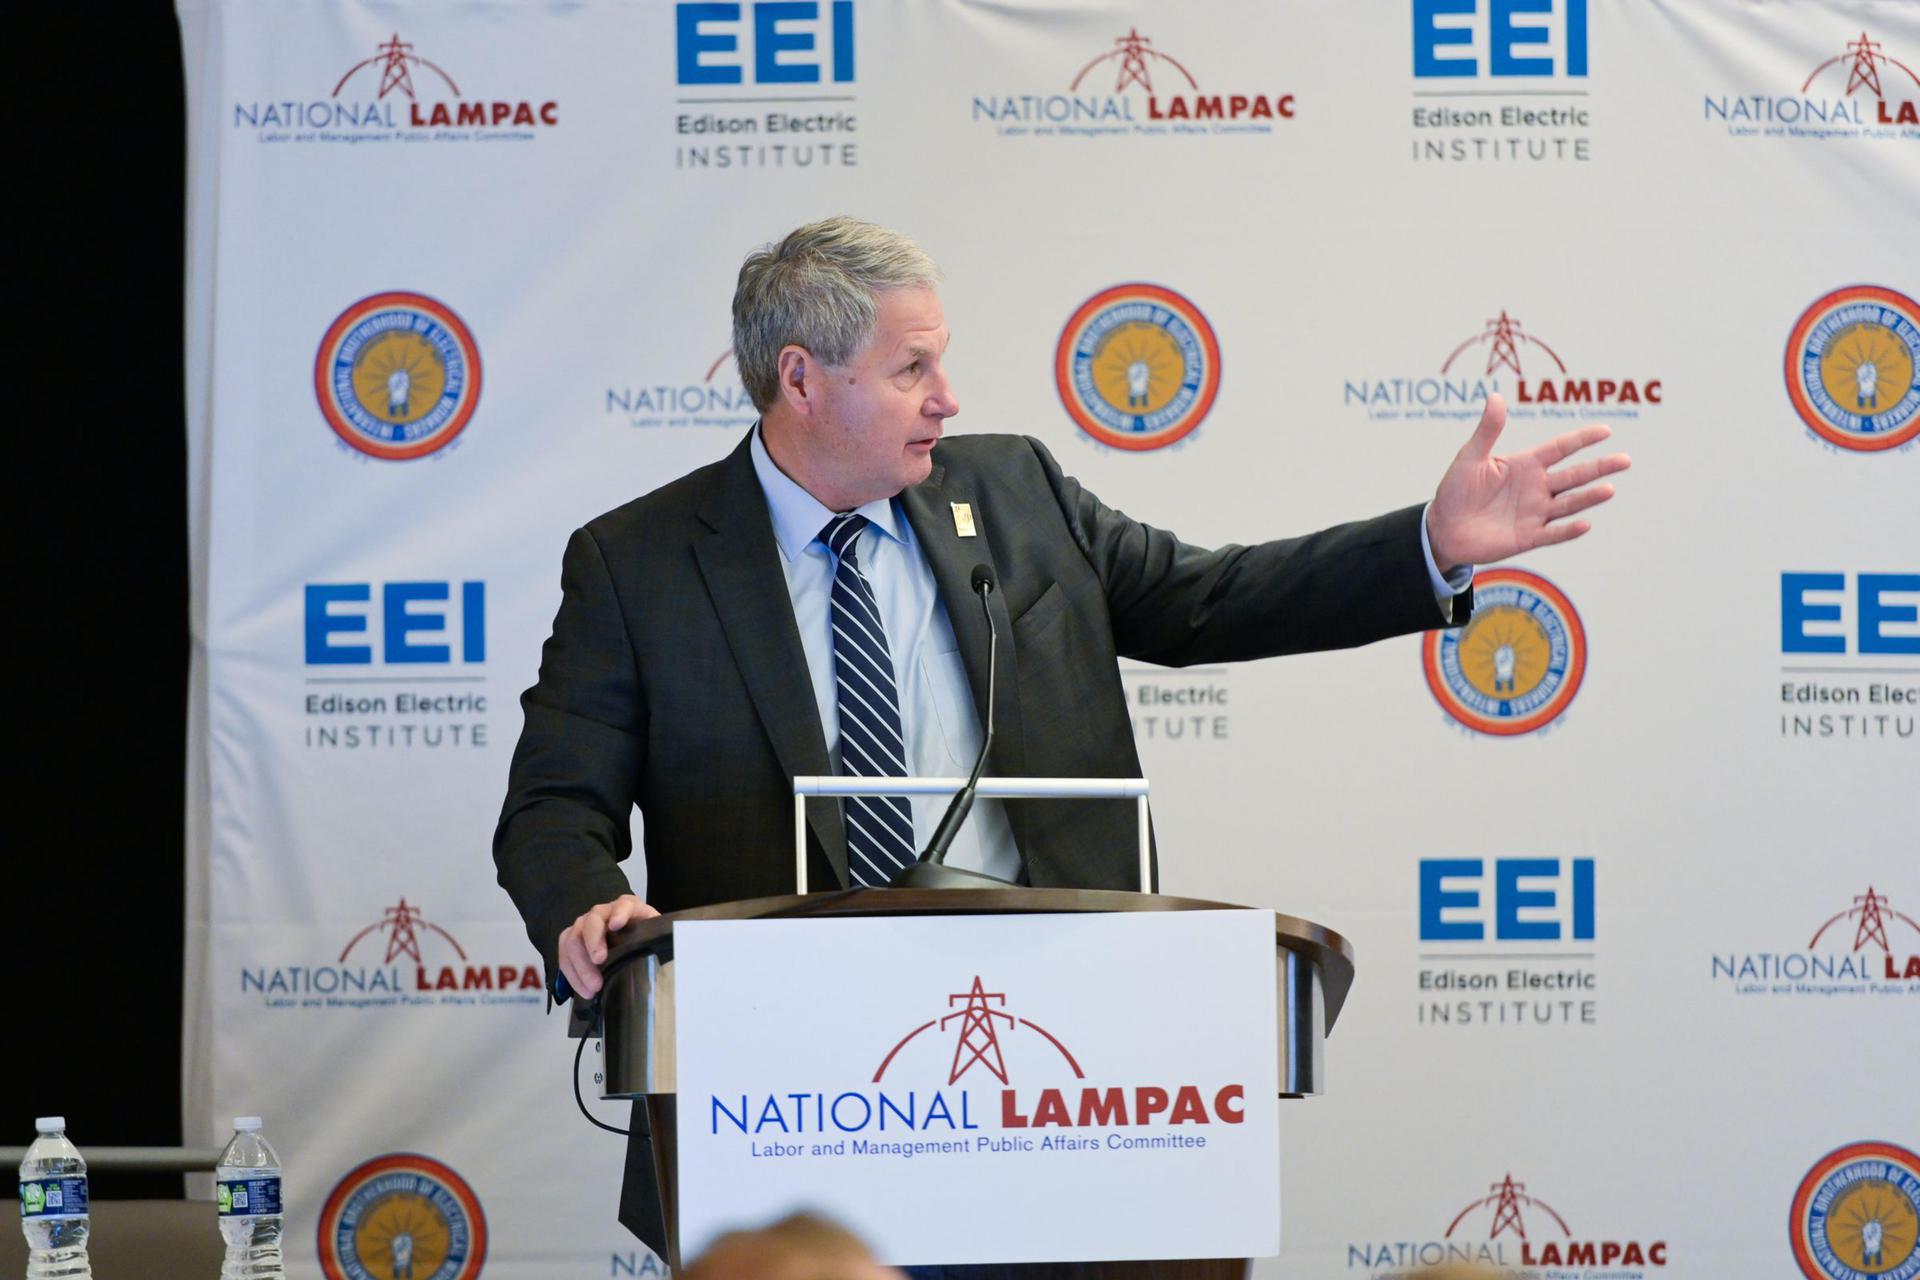 NECA CEO Speaks at 2022 National LAMPAC Conference